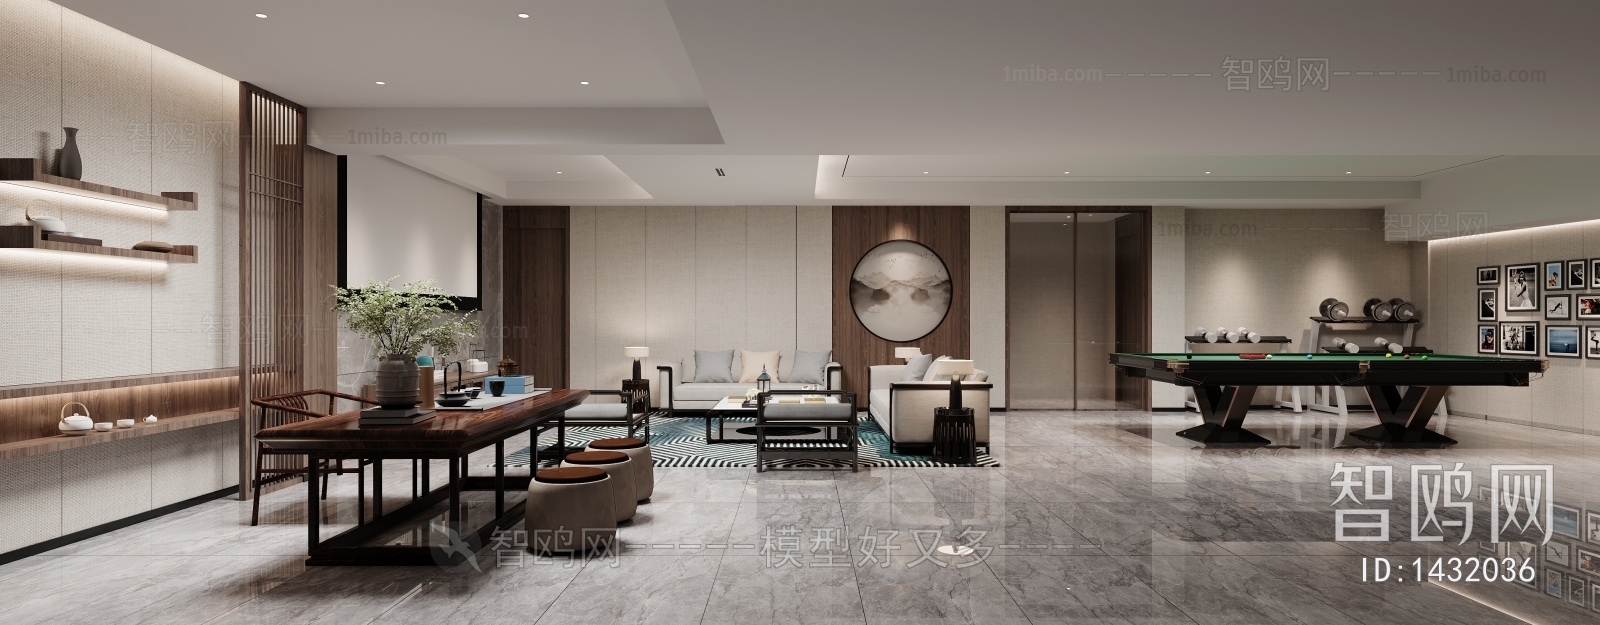 New Chinese Style Billiards Room